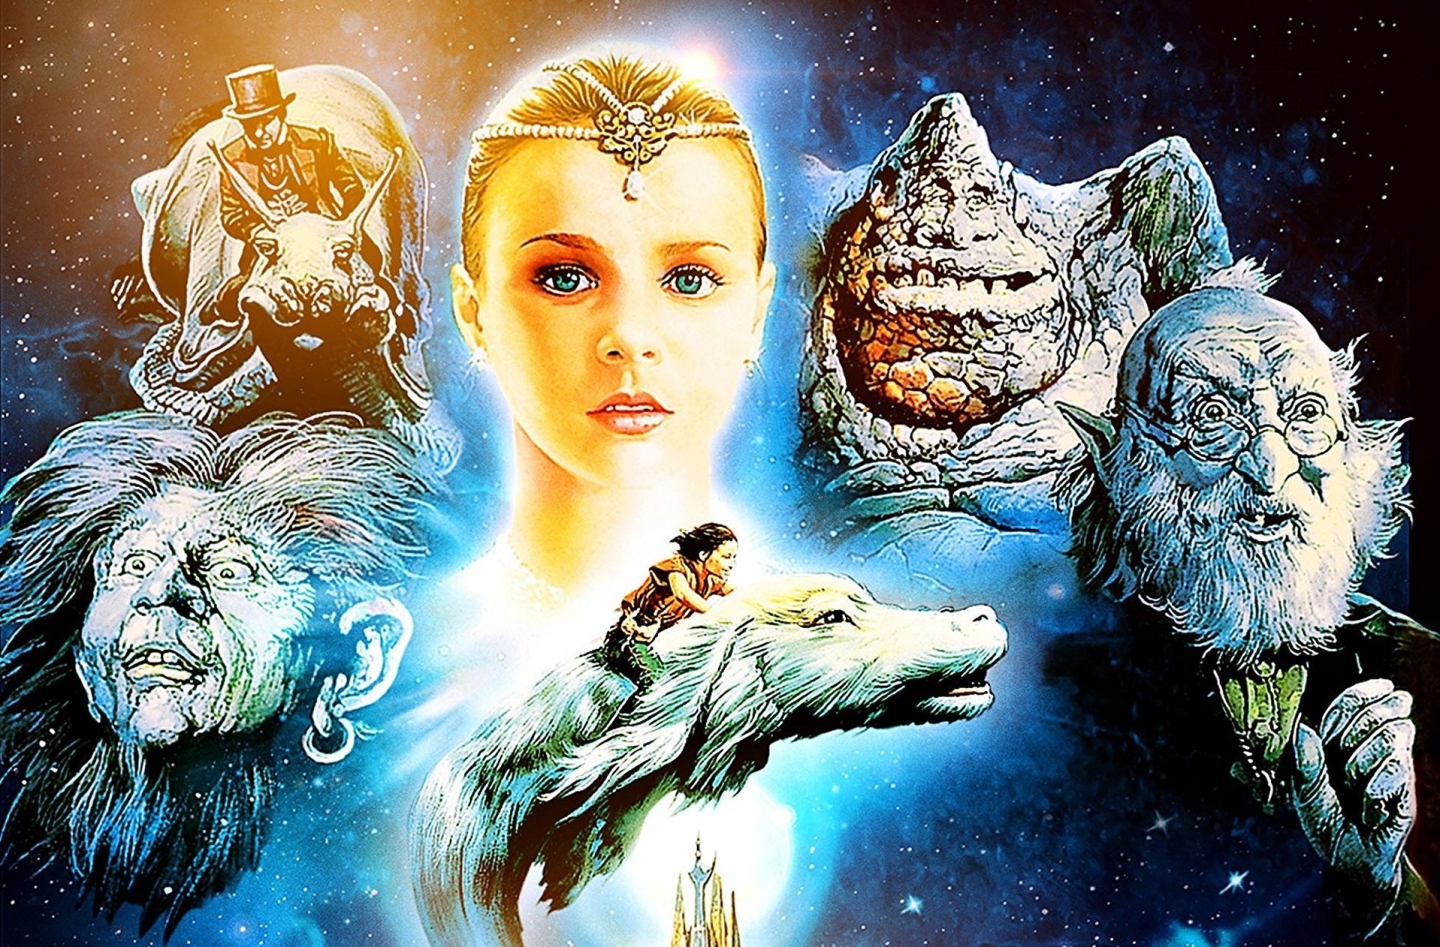 Preteen existentialism two boys one horse and a neverending story